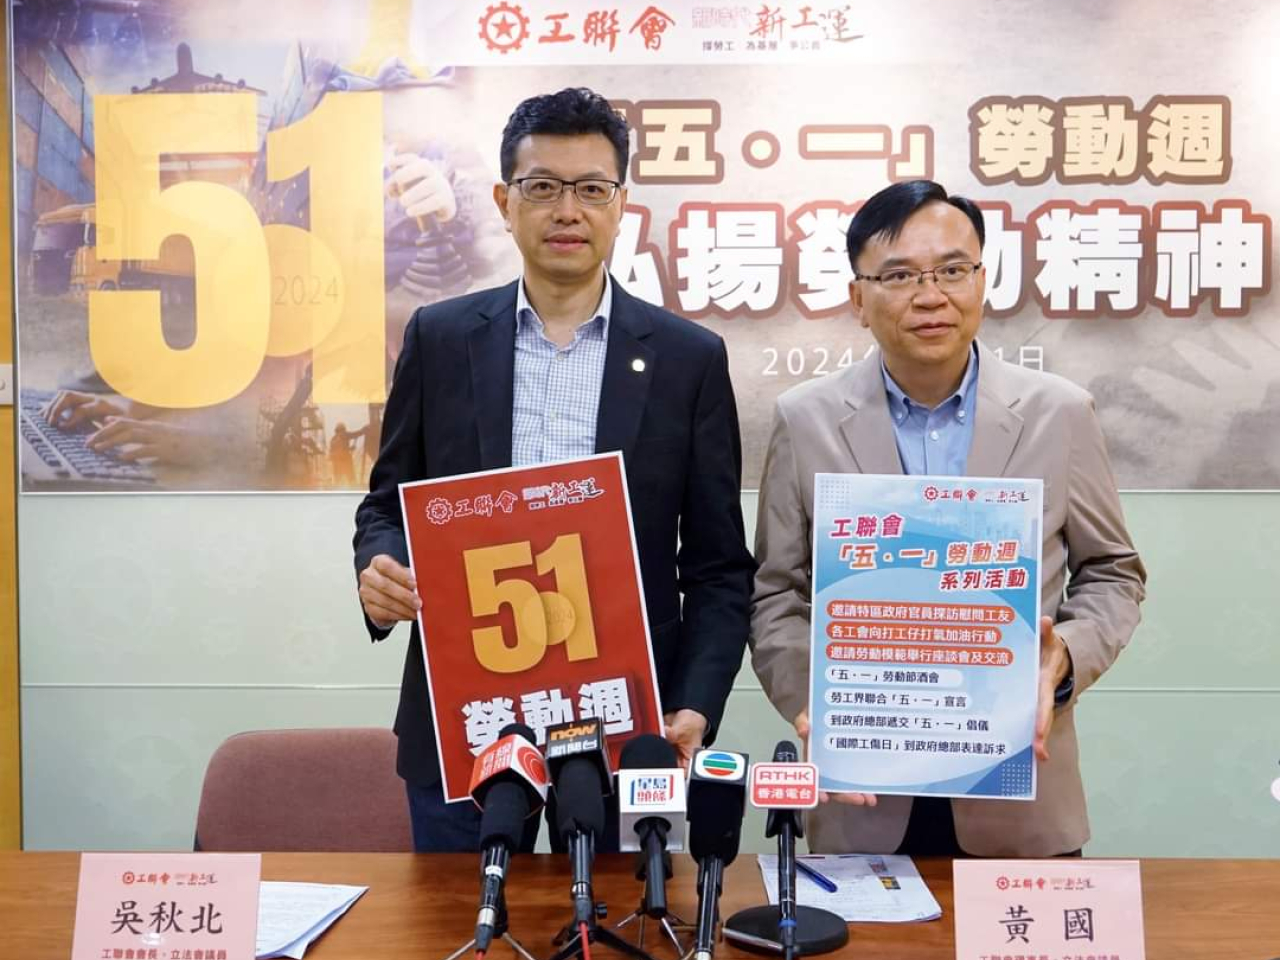 Workers don't want a Labour Day march, says FTU